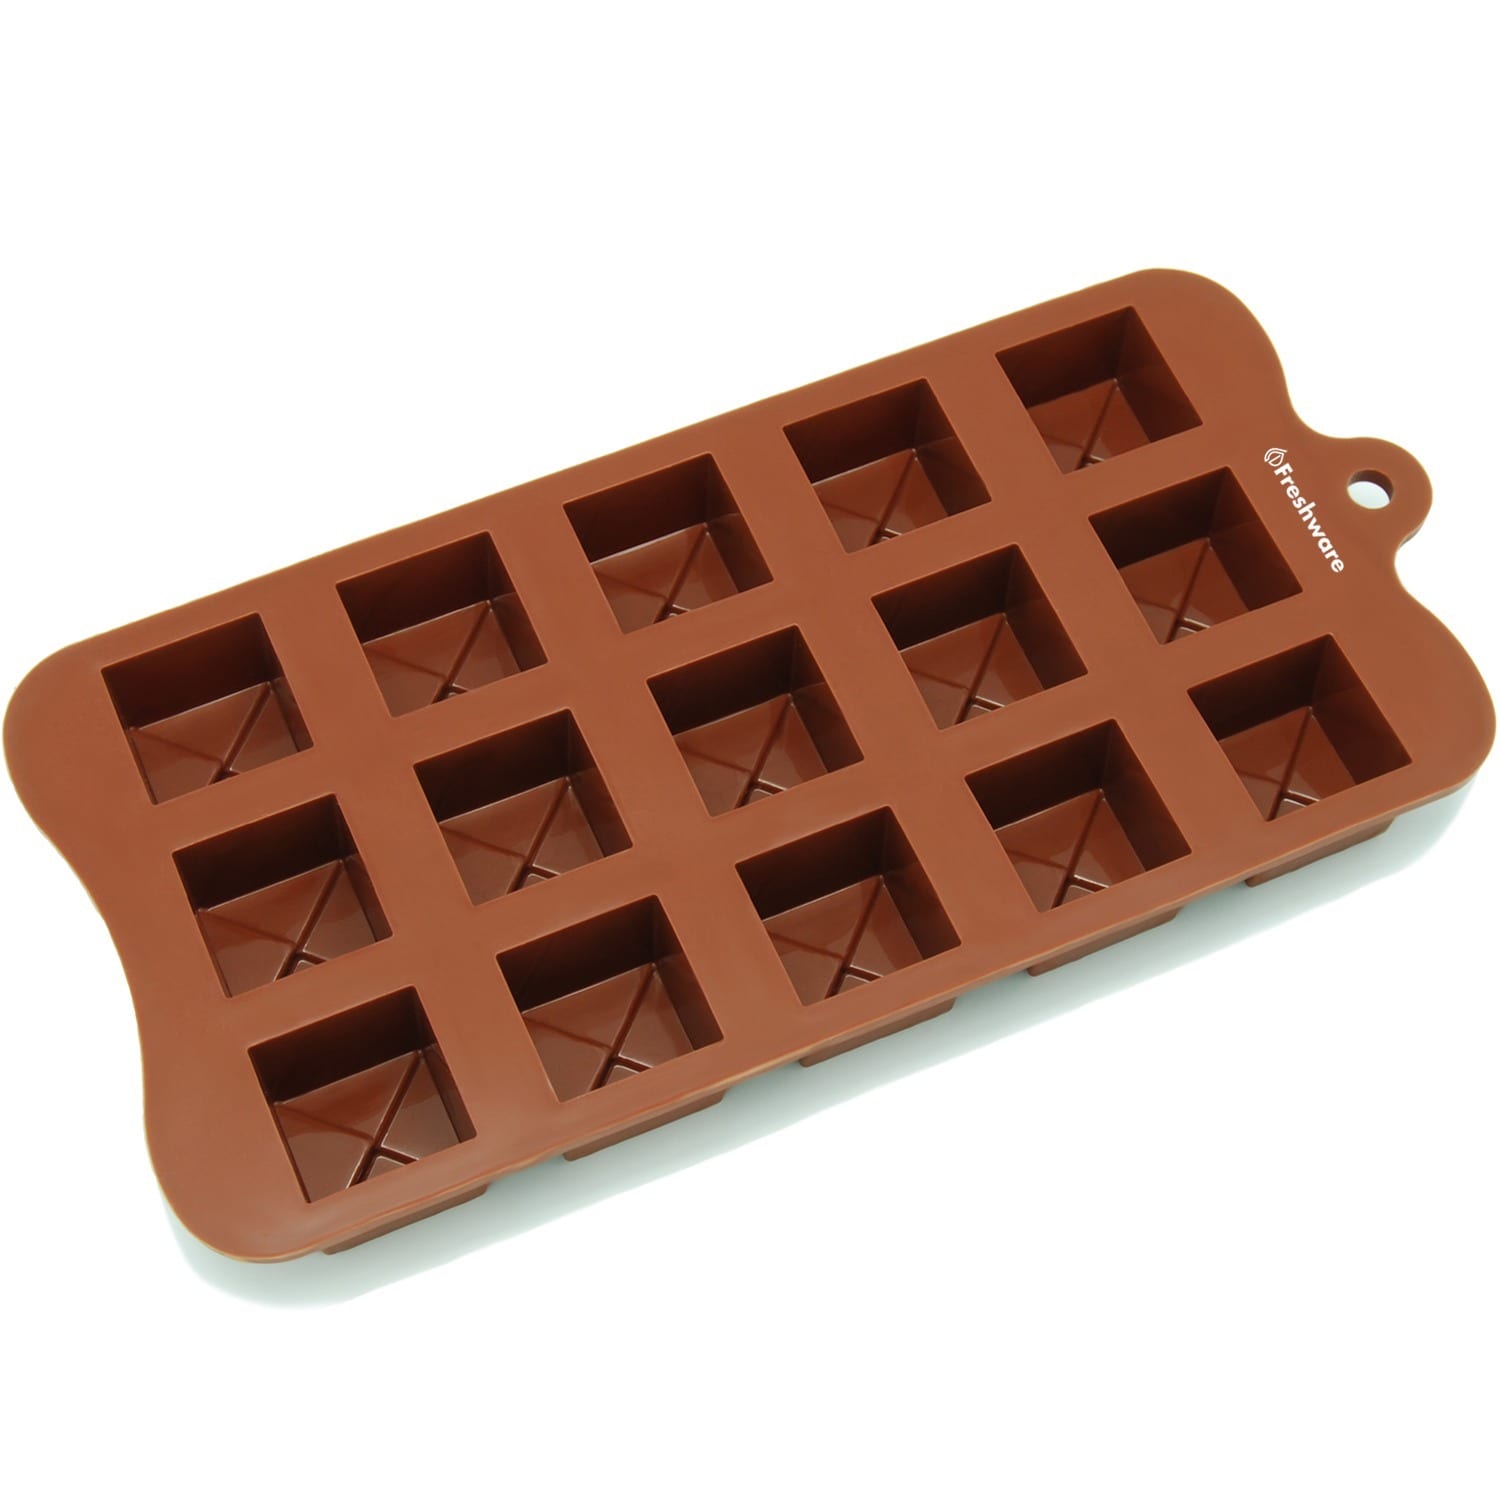 https://ak1.ostkcdn.com/images/products/8355302/Freshware-Brown-15-cavity-Square-Chocolate-and-Candy-Silicone-Mold-327a7c81-57fd-41f8-ba18-7a925b267383.jpg